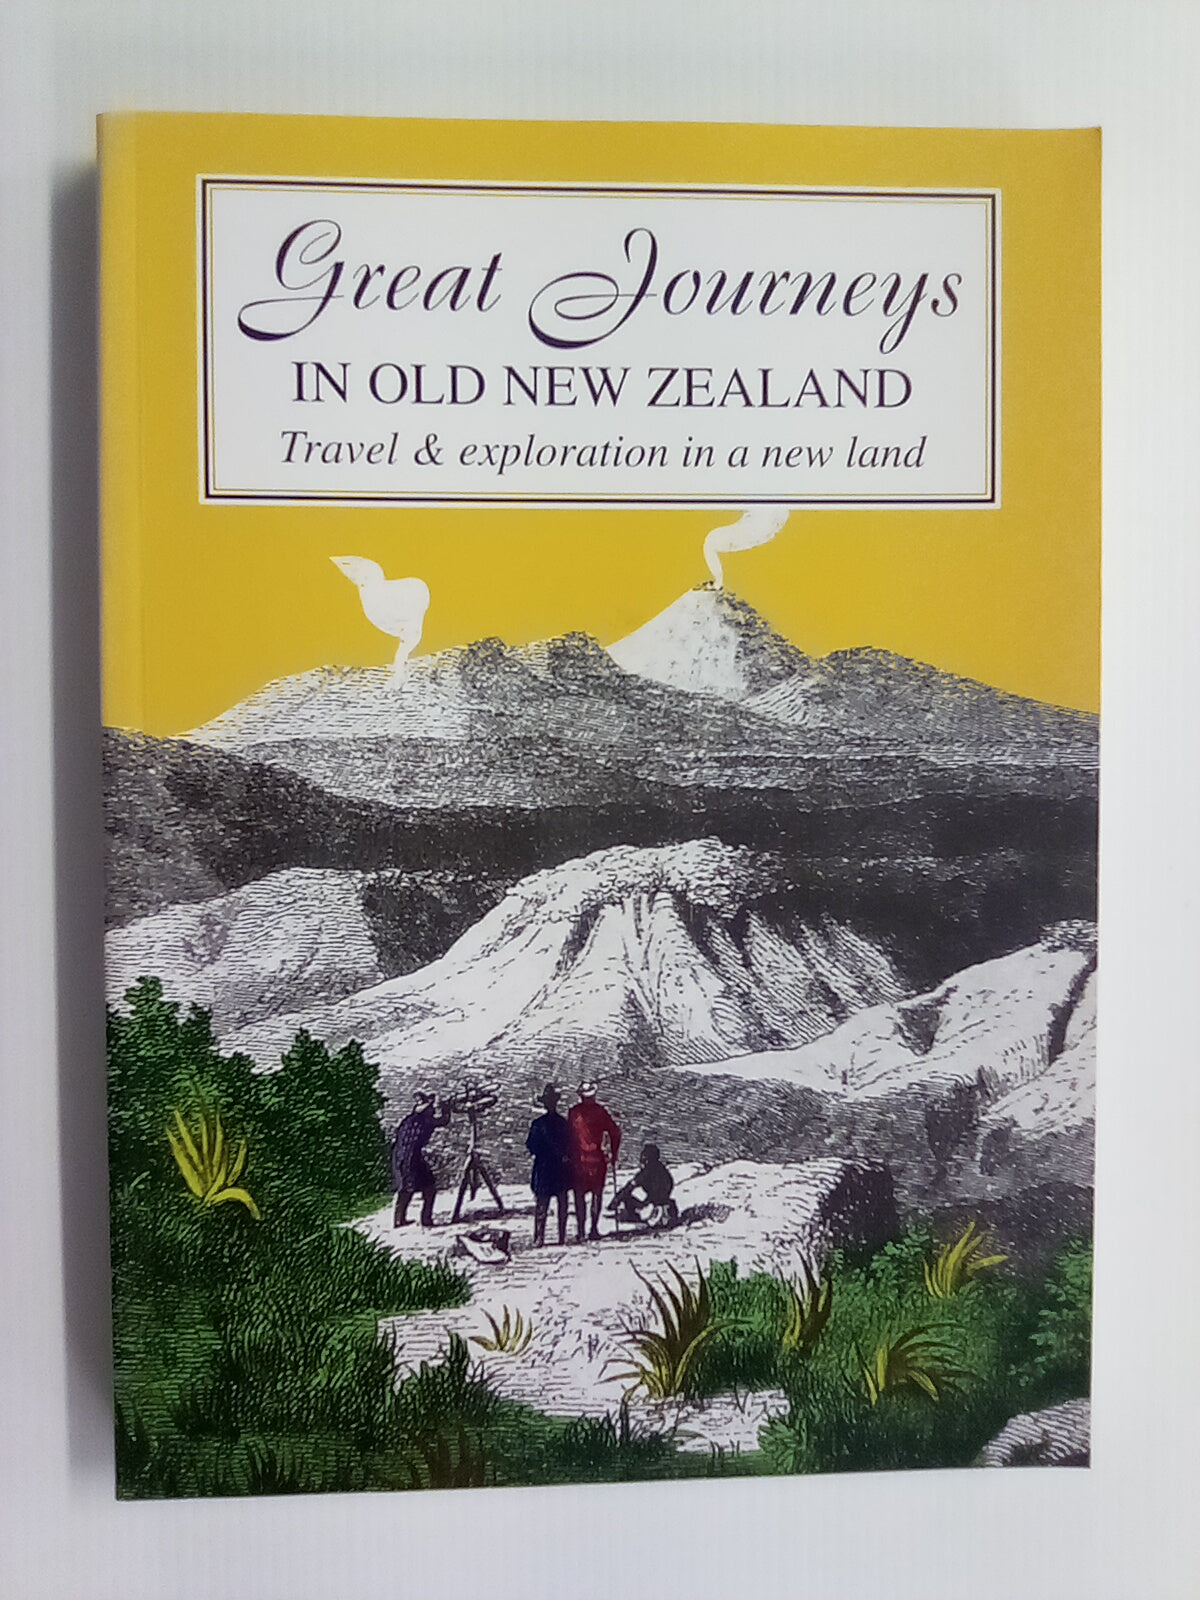 Great Journeys in Old New Zealand - Travel & Exploration in a New Land